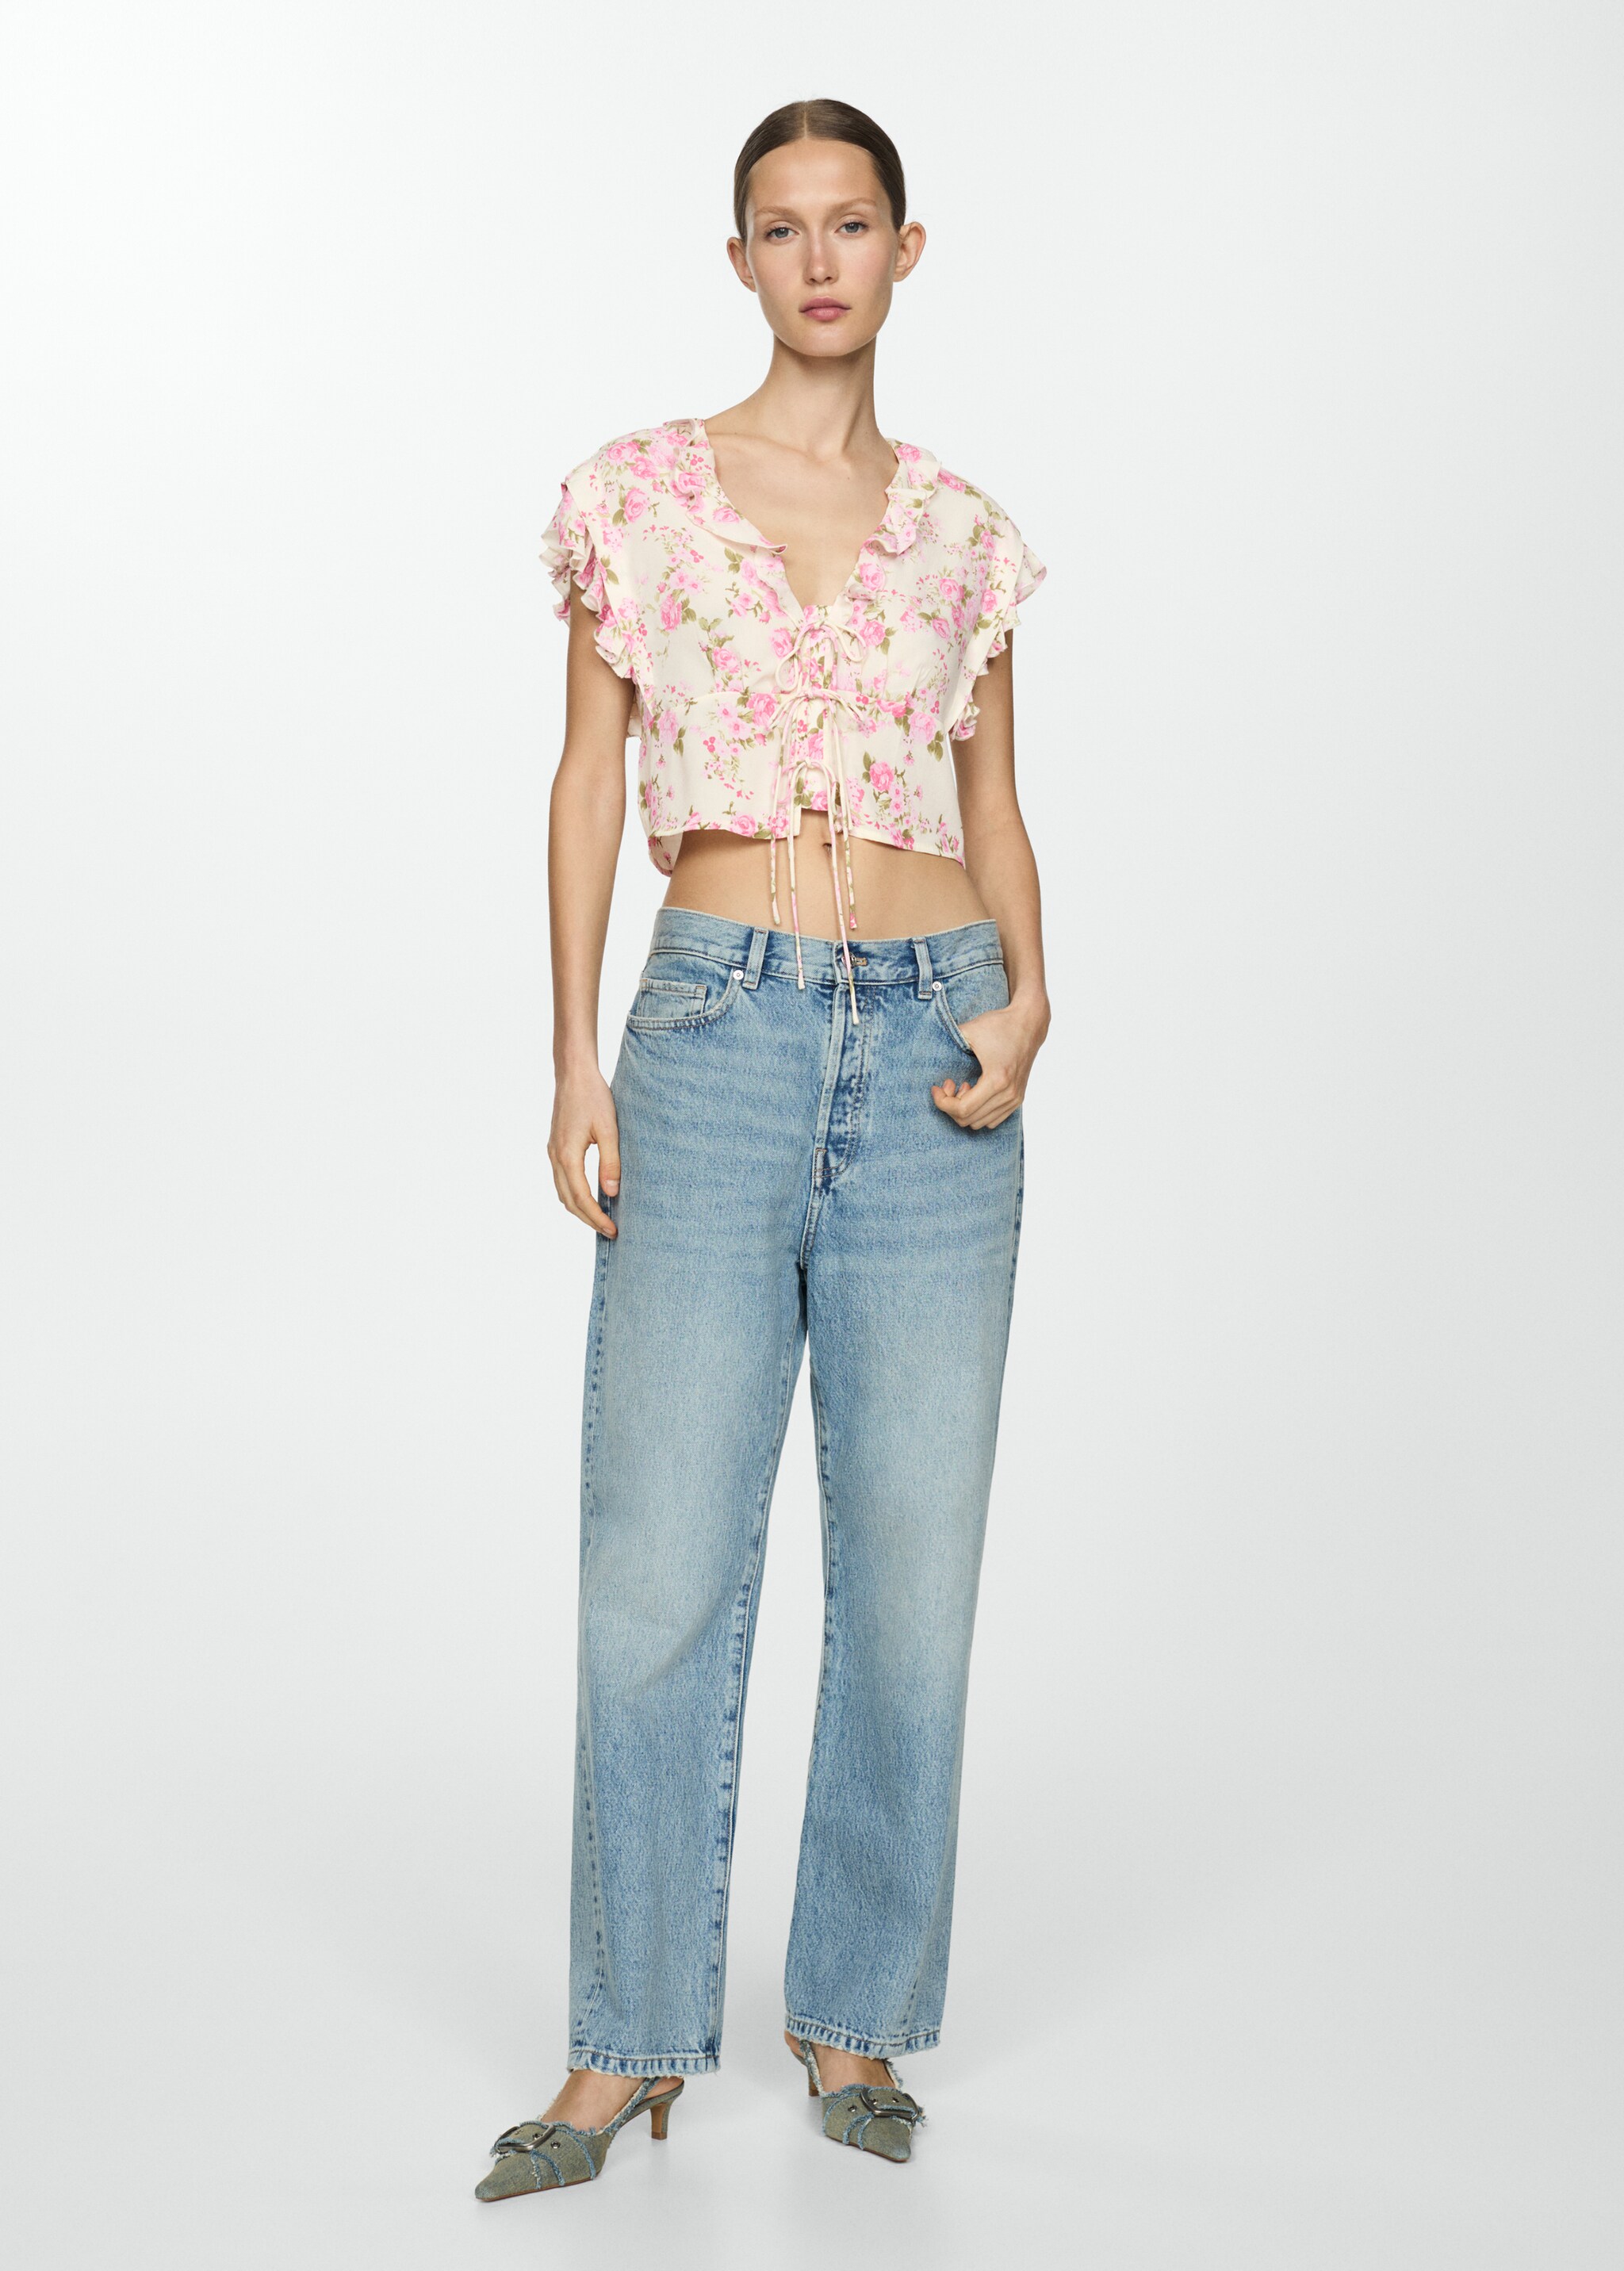 Floral blouse with bow closure - General plane